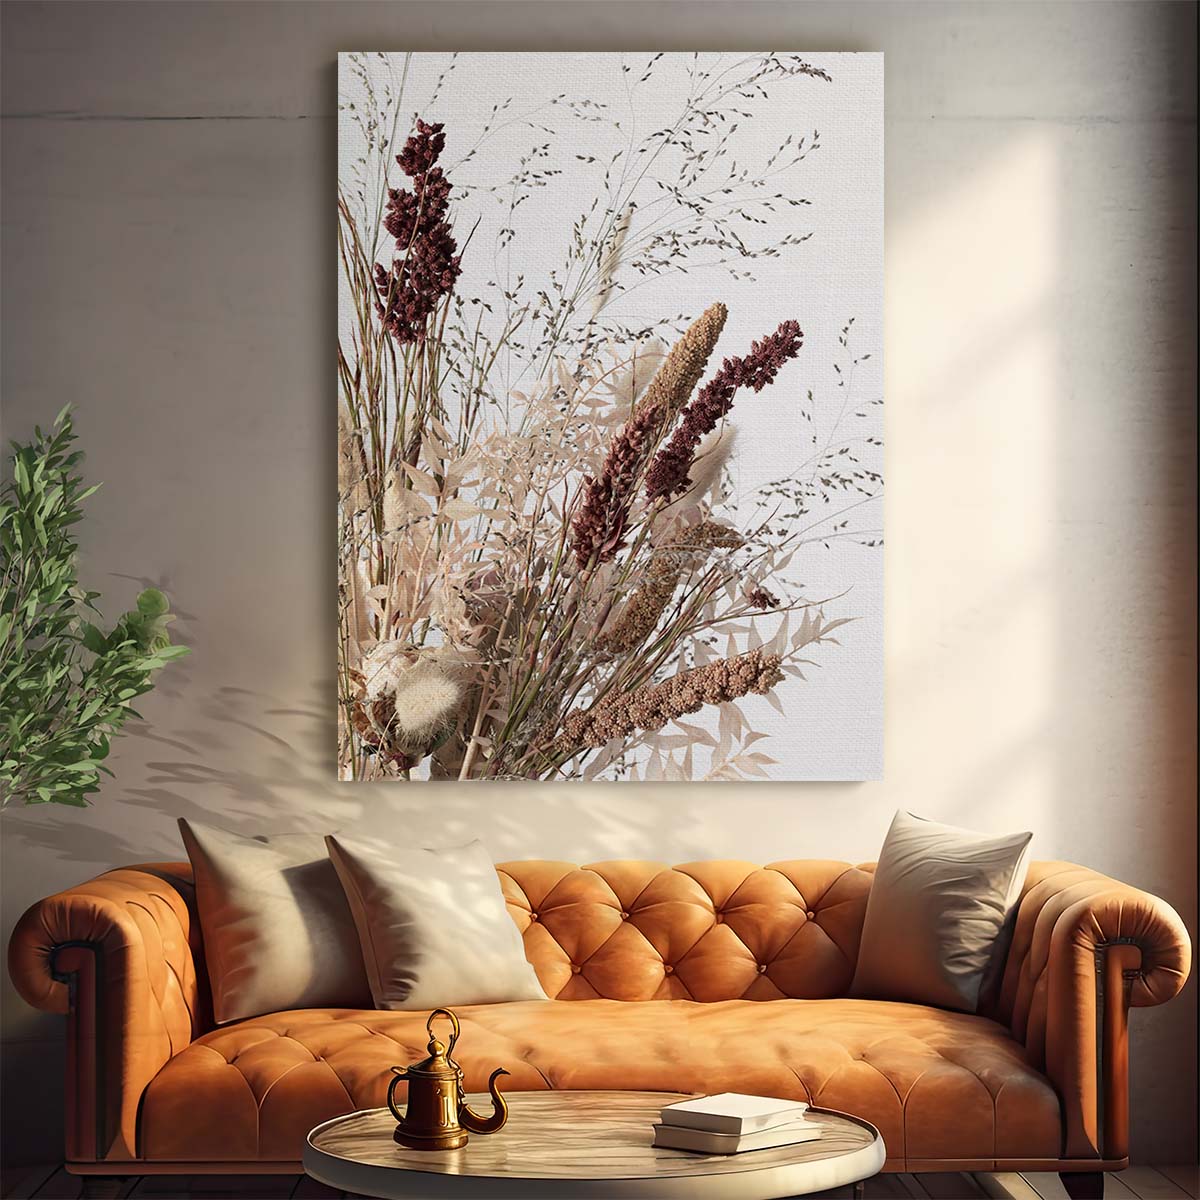 Botanical Still Life Photography Withered Floral Bouquet Studio Art by Luxuriance Designs, made in USA